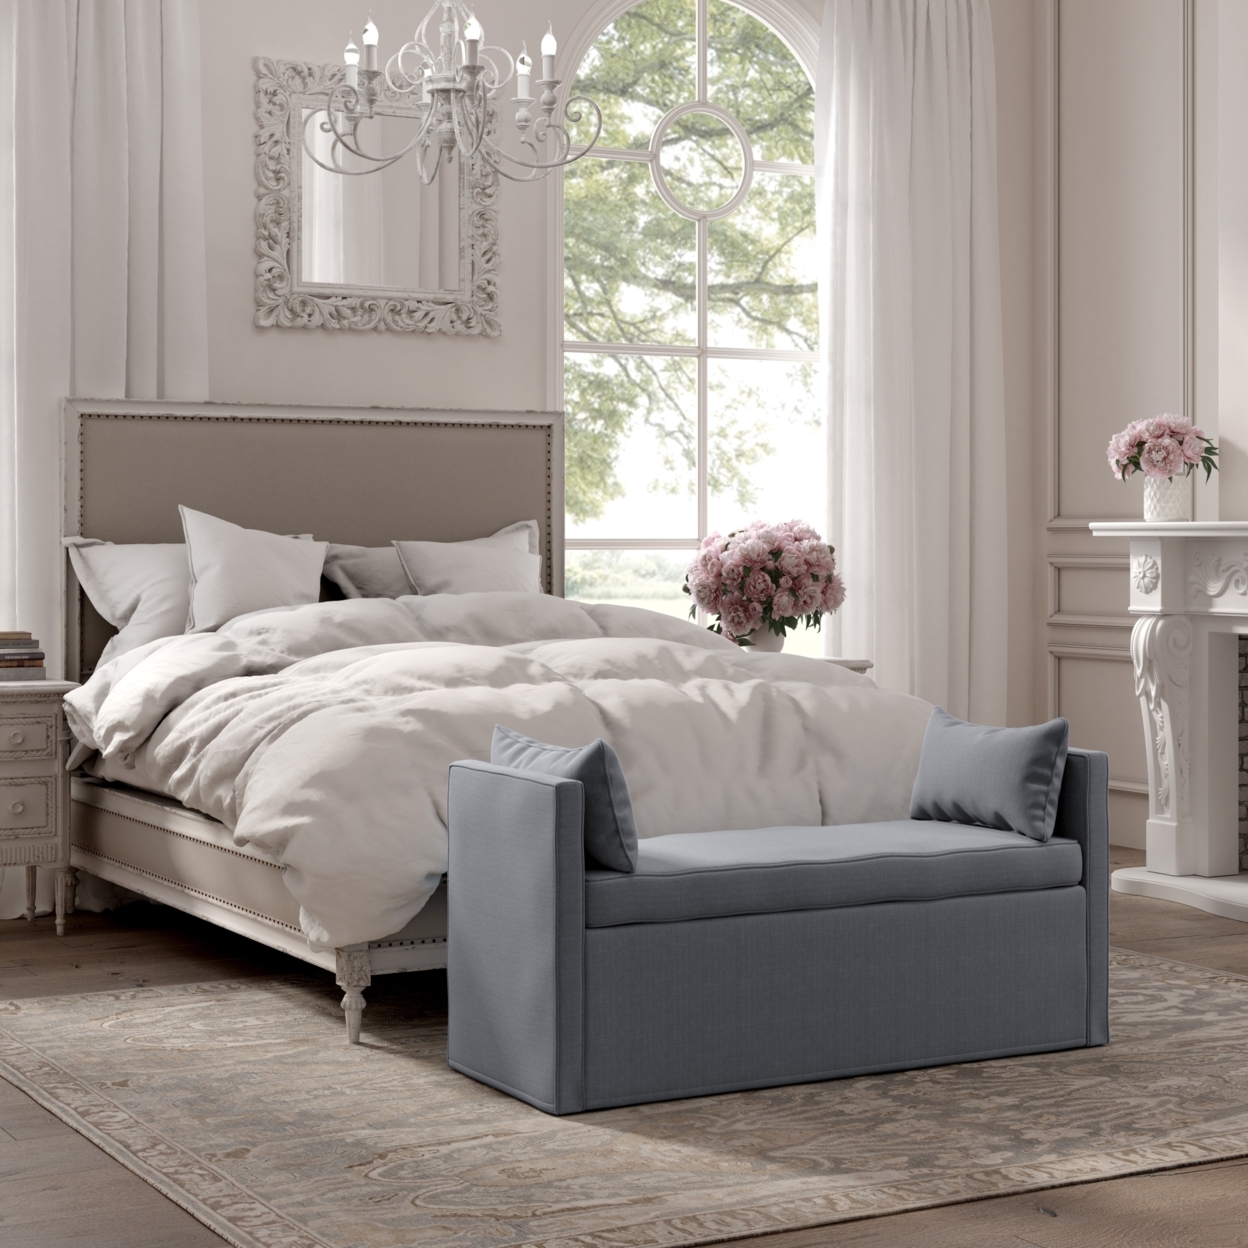 Persephone Bench-Upholstered-Piping Details-Two Pillows - Dark Grey